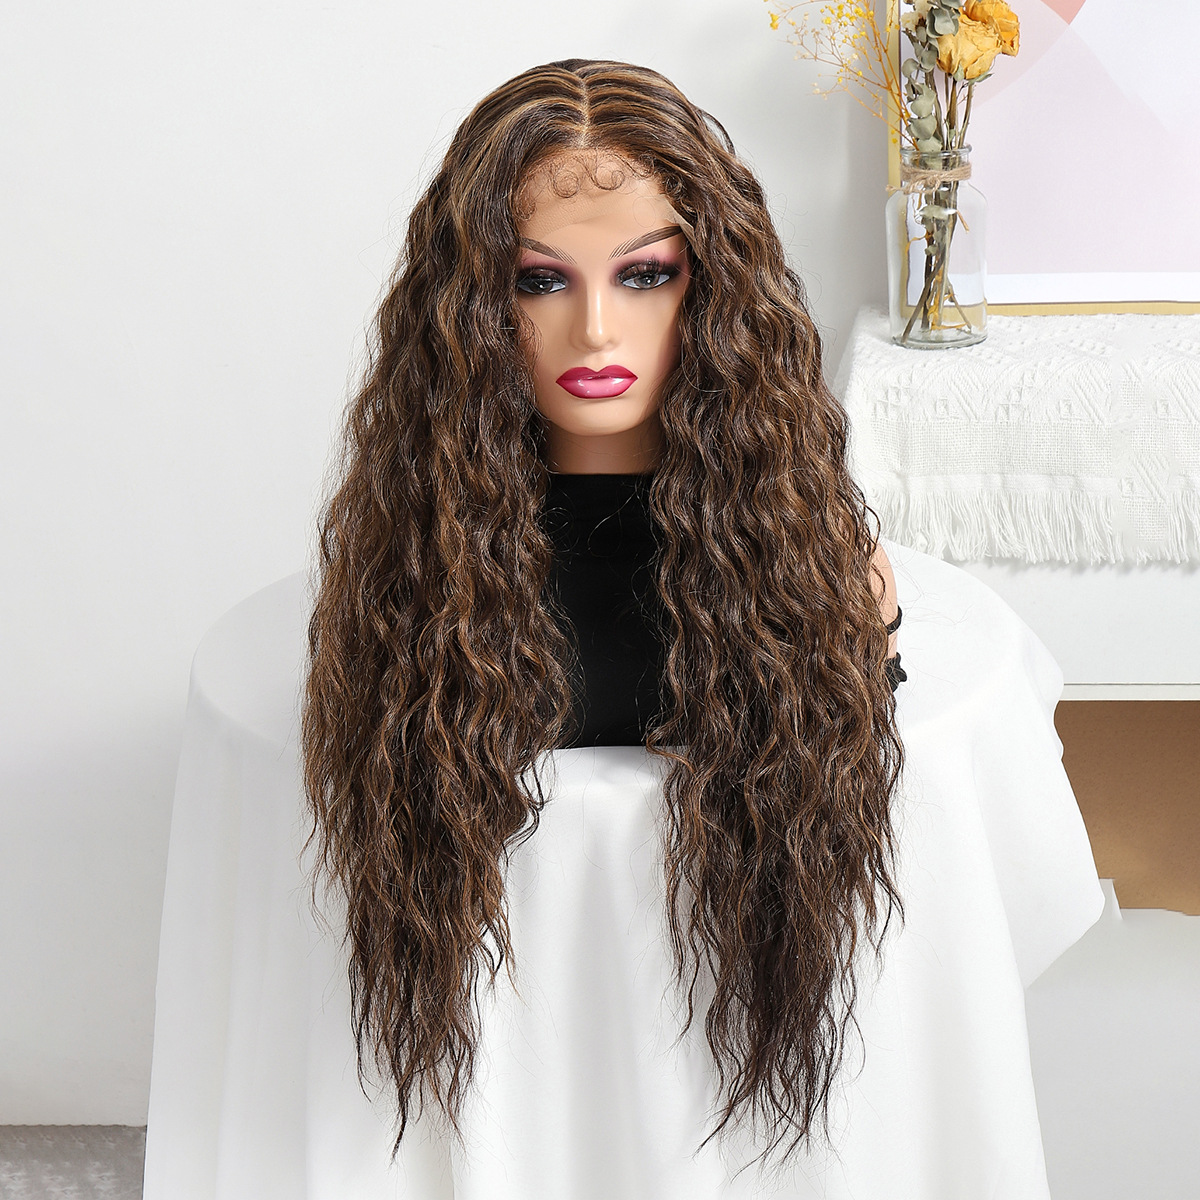 New European and American African Chemical Fiber High-Temperature Fiber Instant Noodle Curls Long Dyed Wig Headgear Newlookwig Head